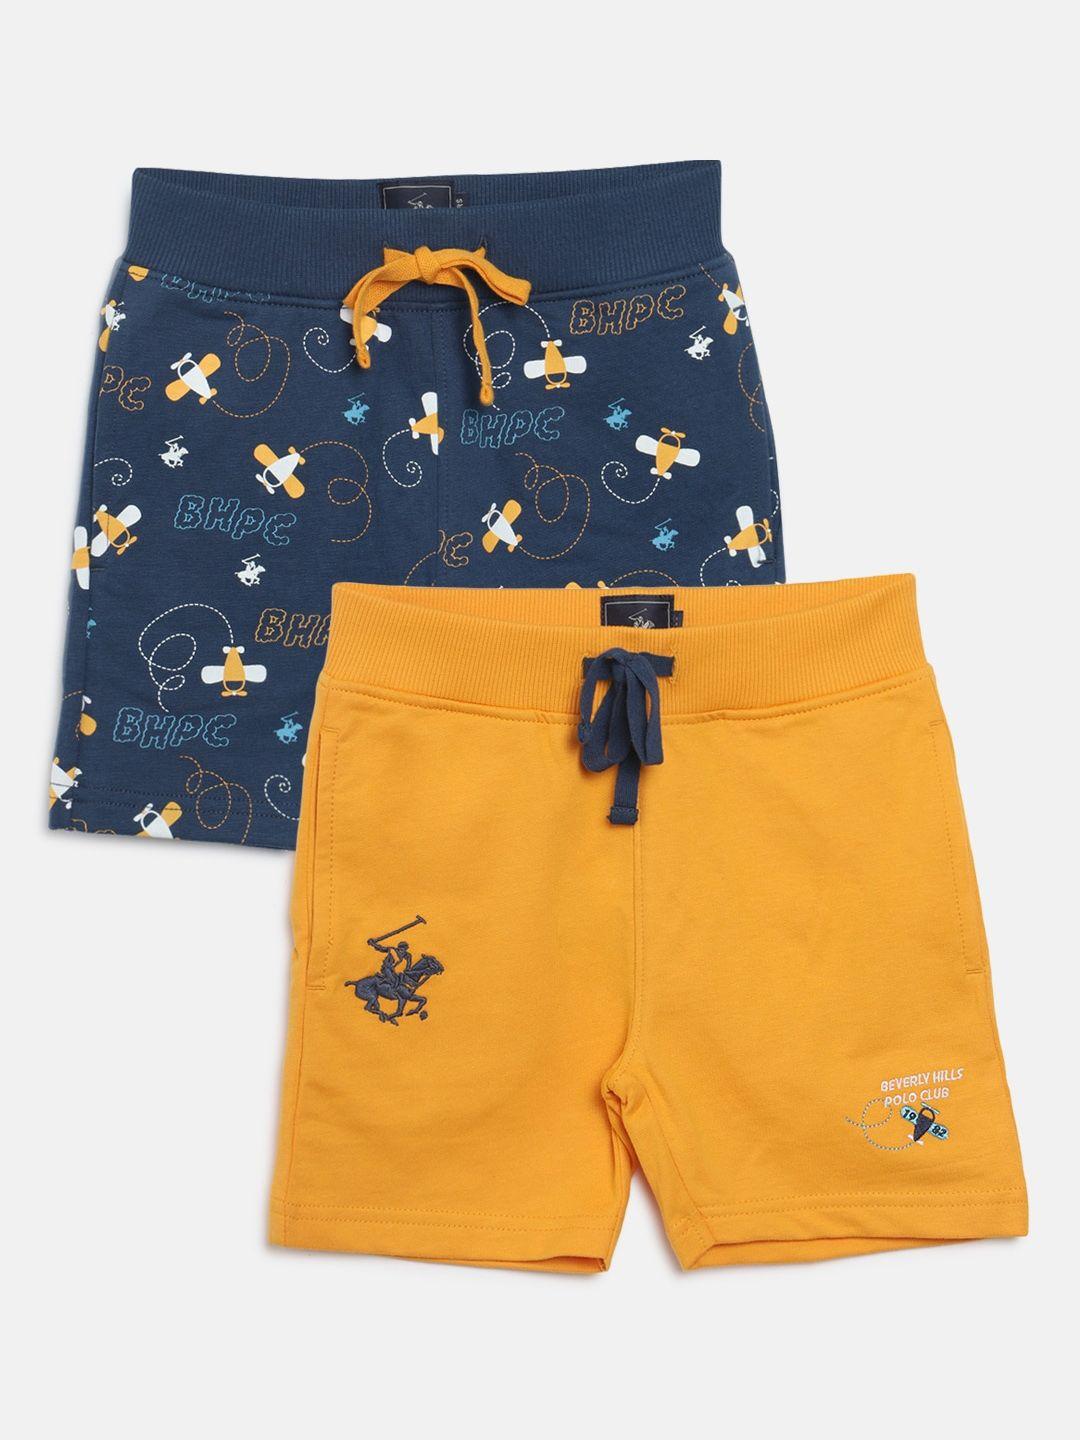 beverly-hills-polo-club-boys-pack-of-2-pure-cotton-shorts